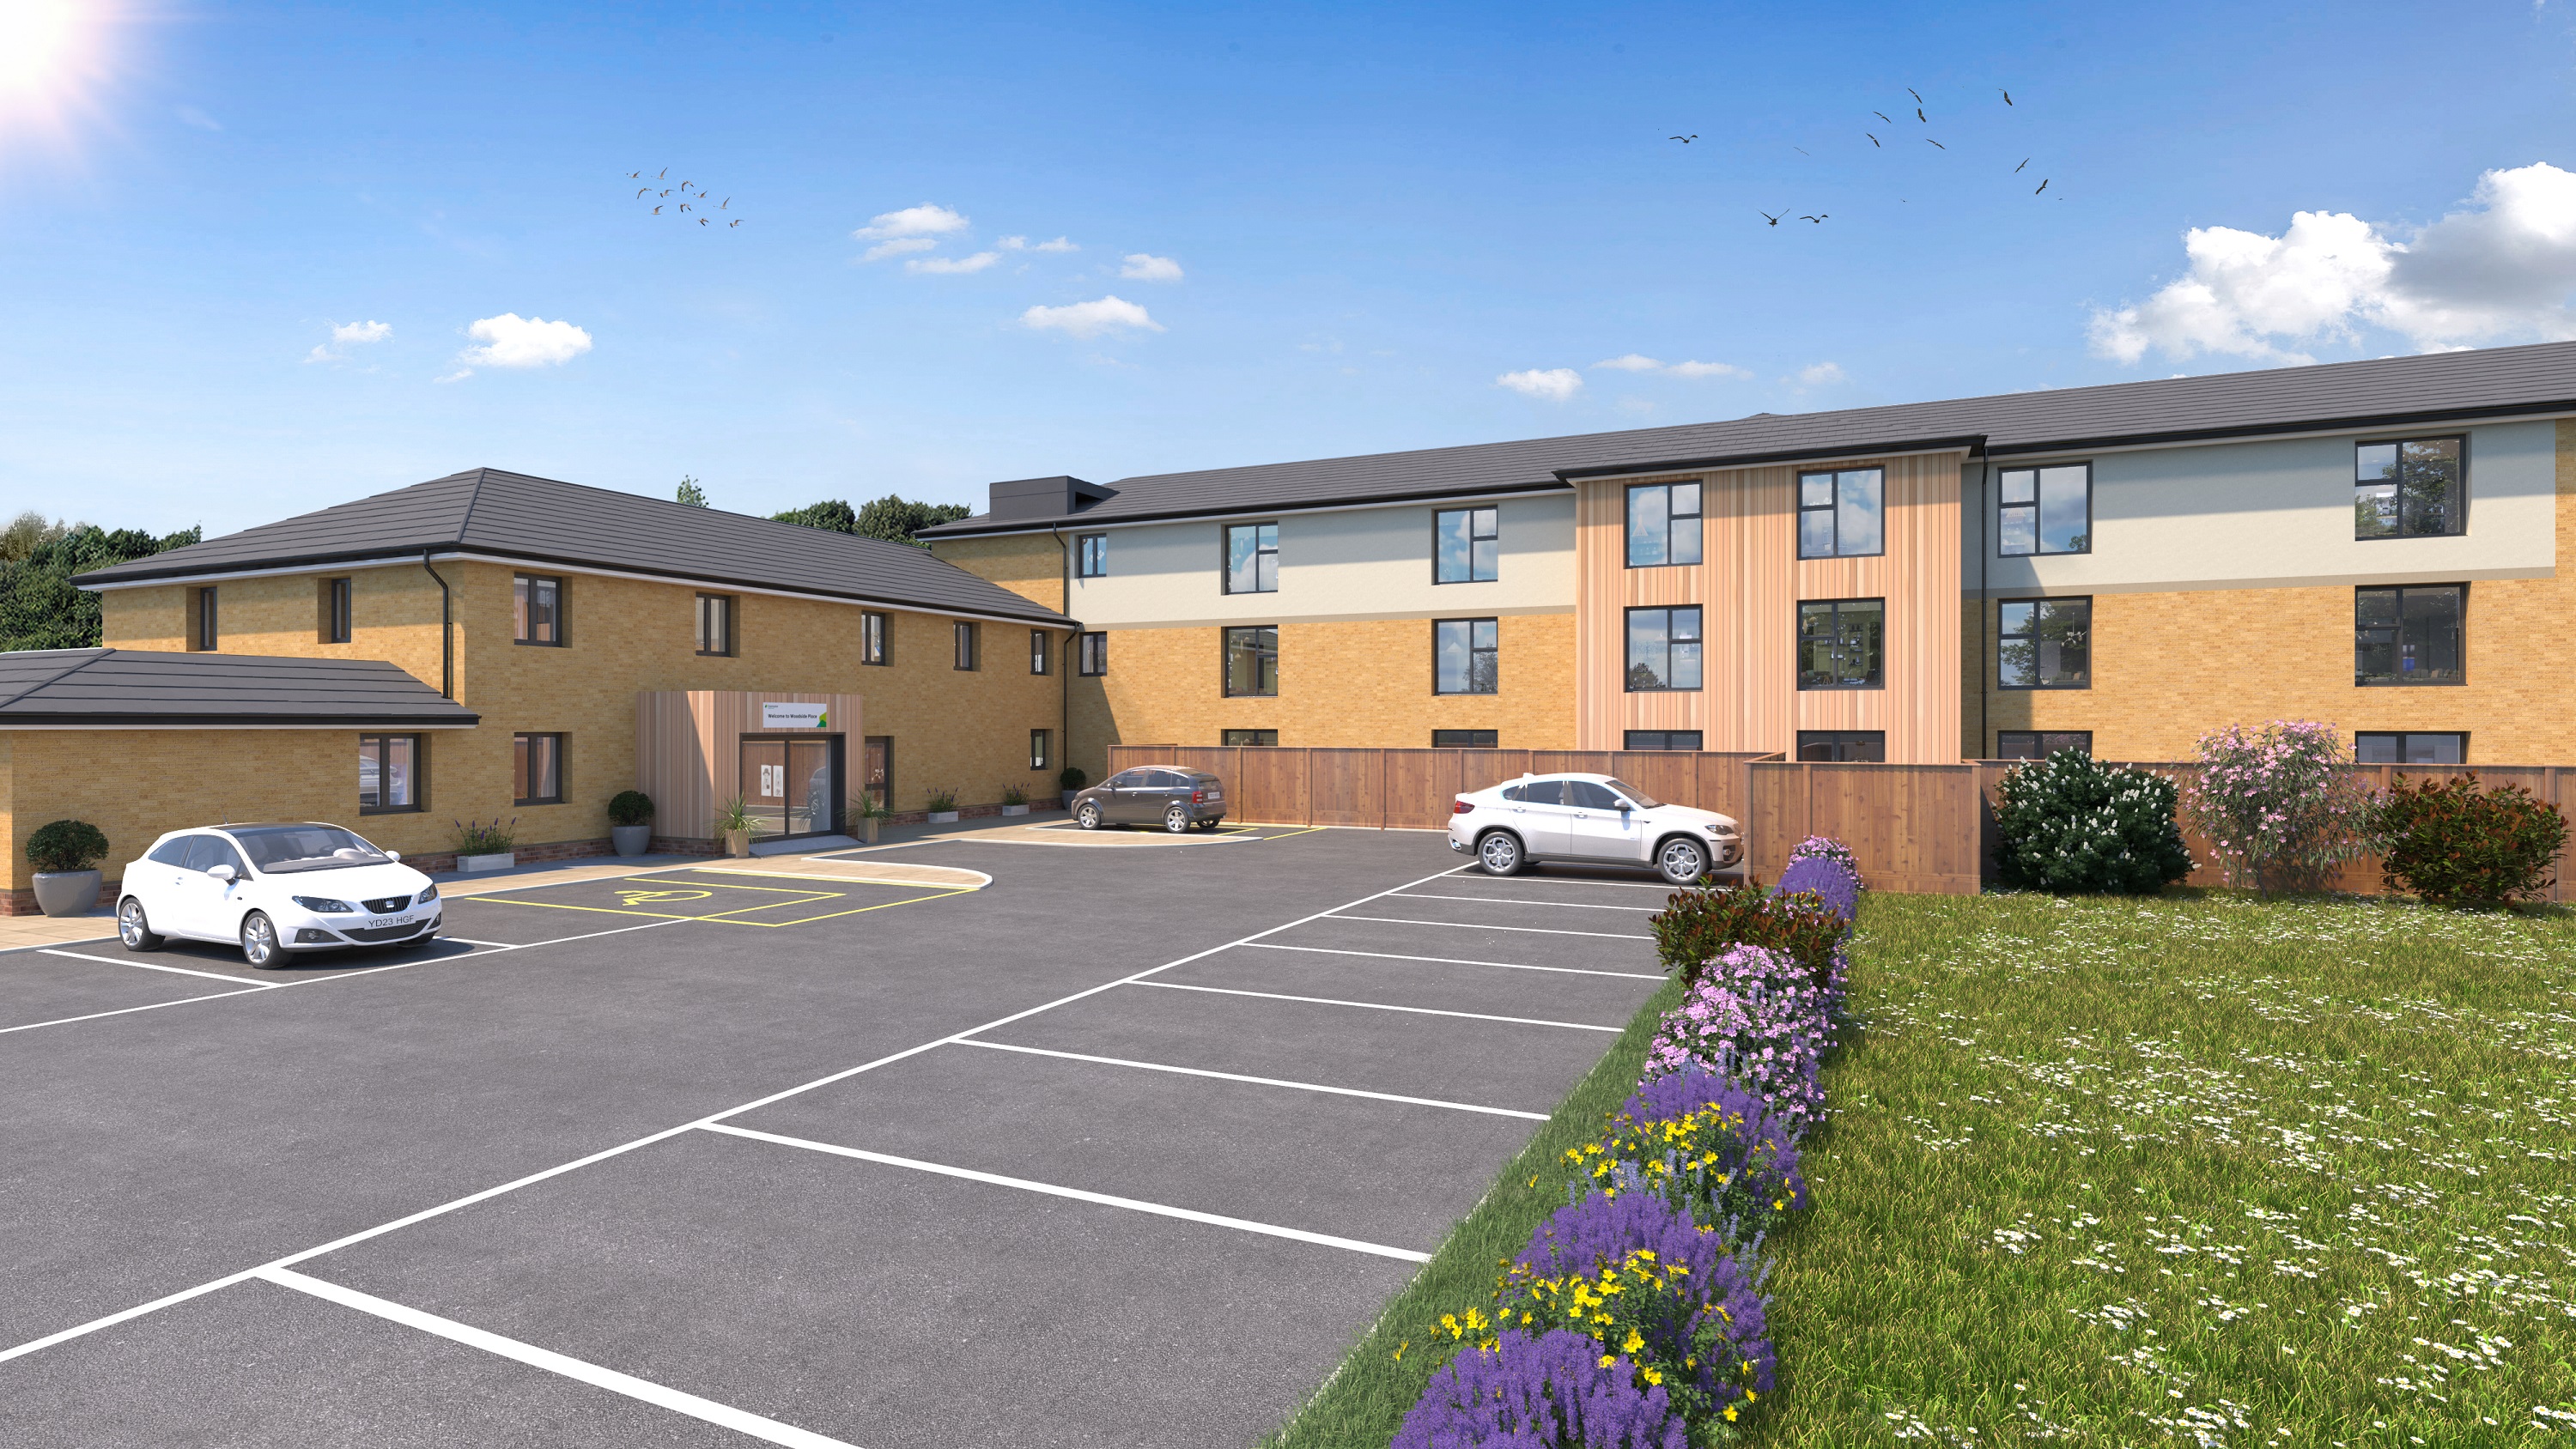 Image for Work starts on specialist £5.2m care home which will create 100 jobs in Telford